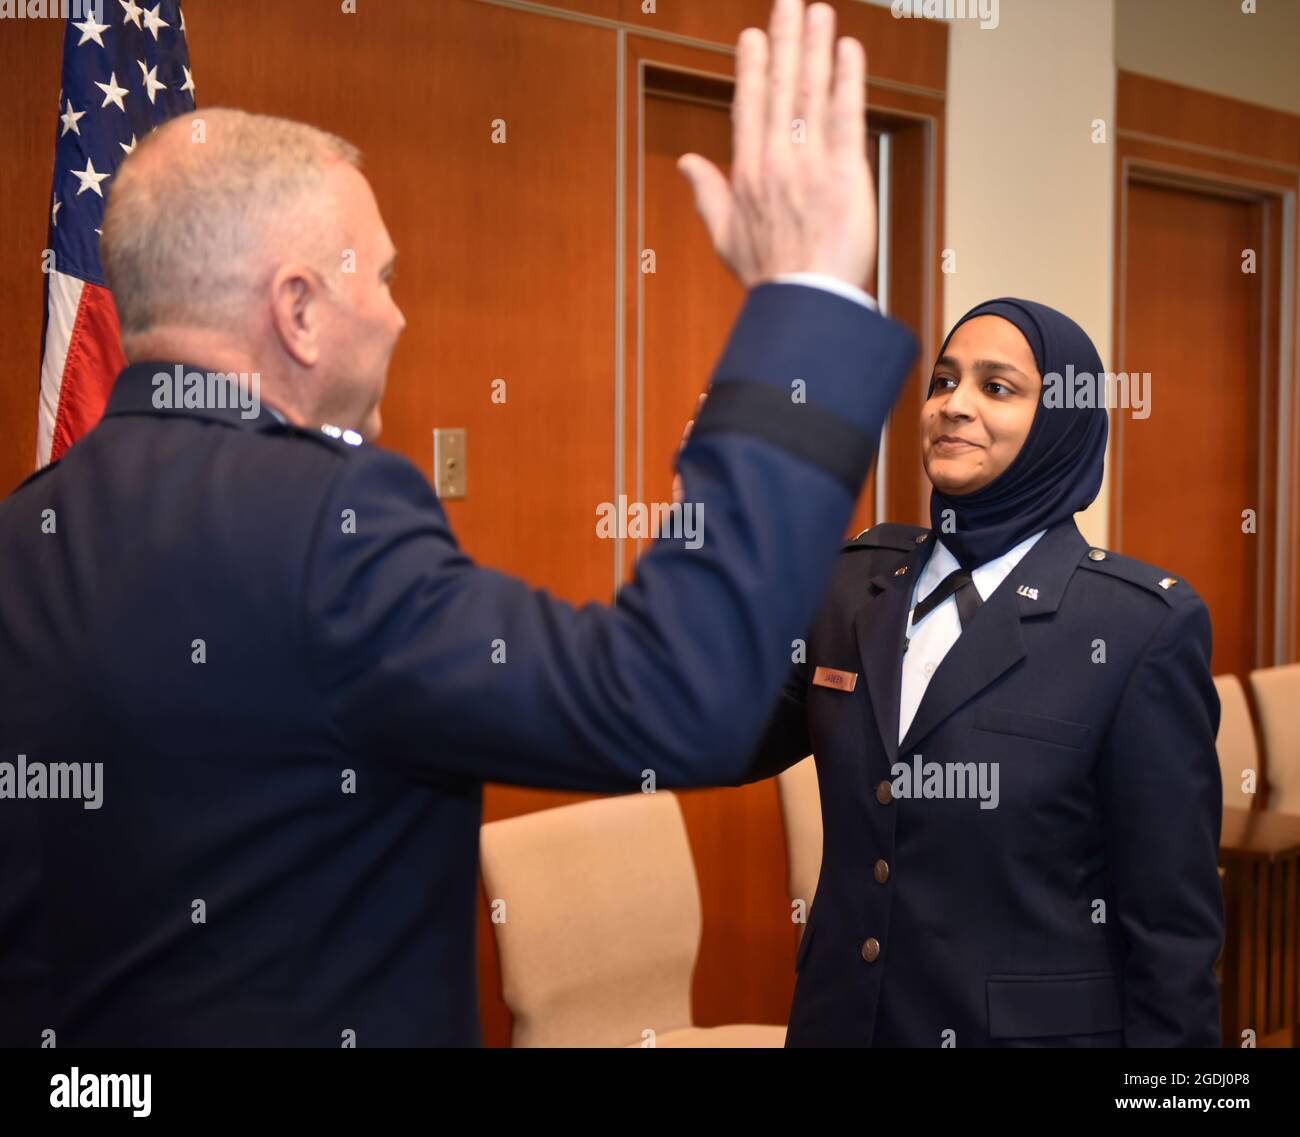 U.S. Air Force Chaplain Candidate Saleha Jabeen is commissioned by U.S. Air Force Chief of Chaplains (Maj. Gen.) Steven Schaick, Dec. 18, 2019 at the Catholic Theological Union, Chicago, Illinois. Jabeen is the first female Muslim Chaplain in the Air Force and Department of Defense. (U.S. Air Force photo/ Tech. Sgt. Armando A. Schwier-Morales) Stock Photo